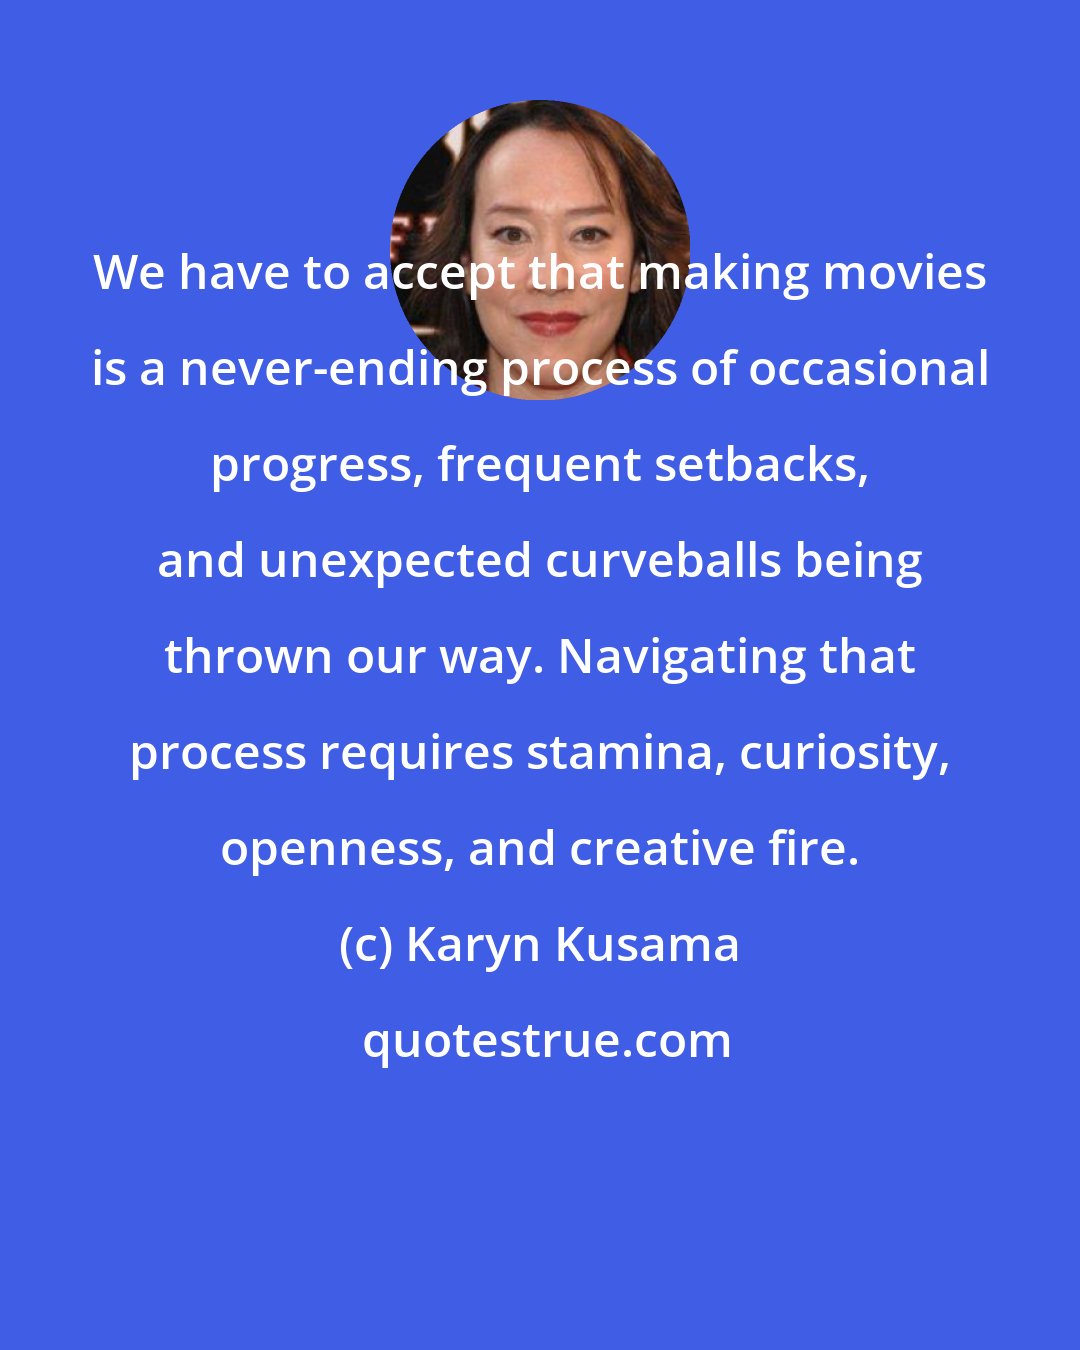 Karyn Kusama: We have to accept that making movies is a never-ending process of occasional progress, frequent setbacks, and unexpected curveballs being thrown our way. Navigating that process requires stamina, curiosity, openness, and creative fire.